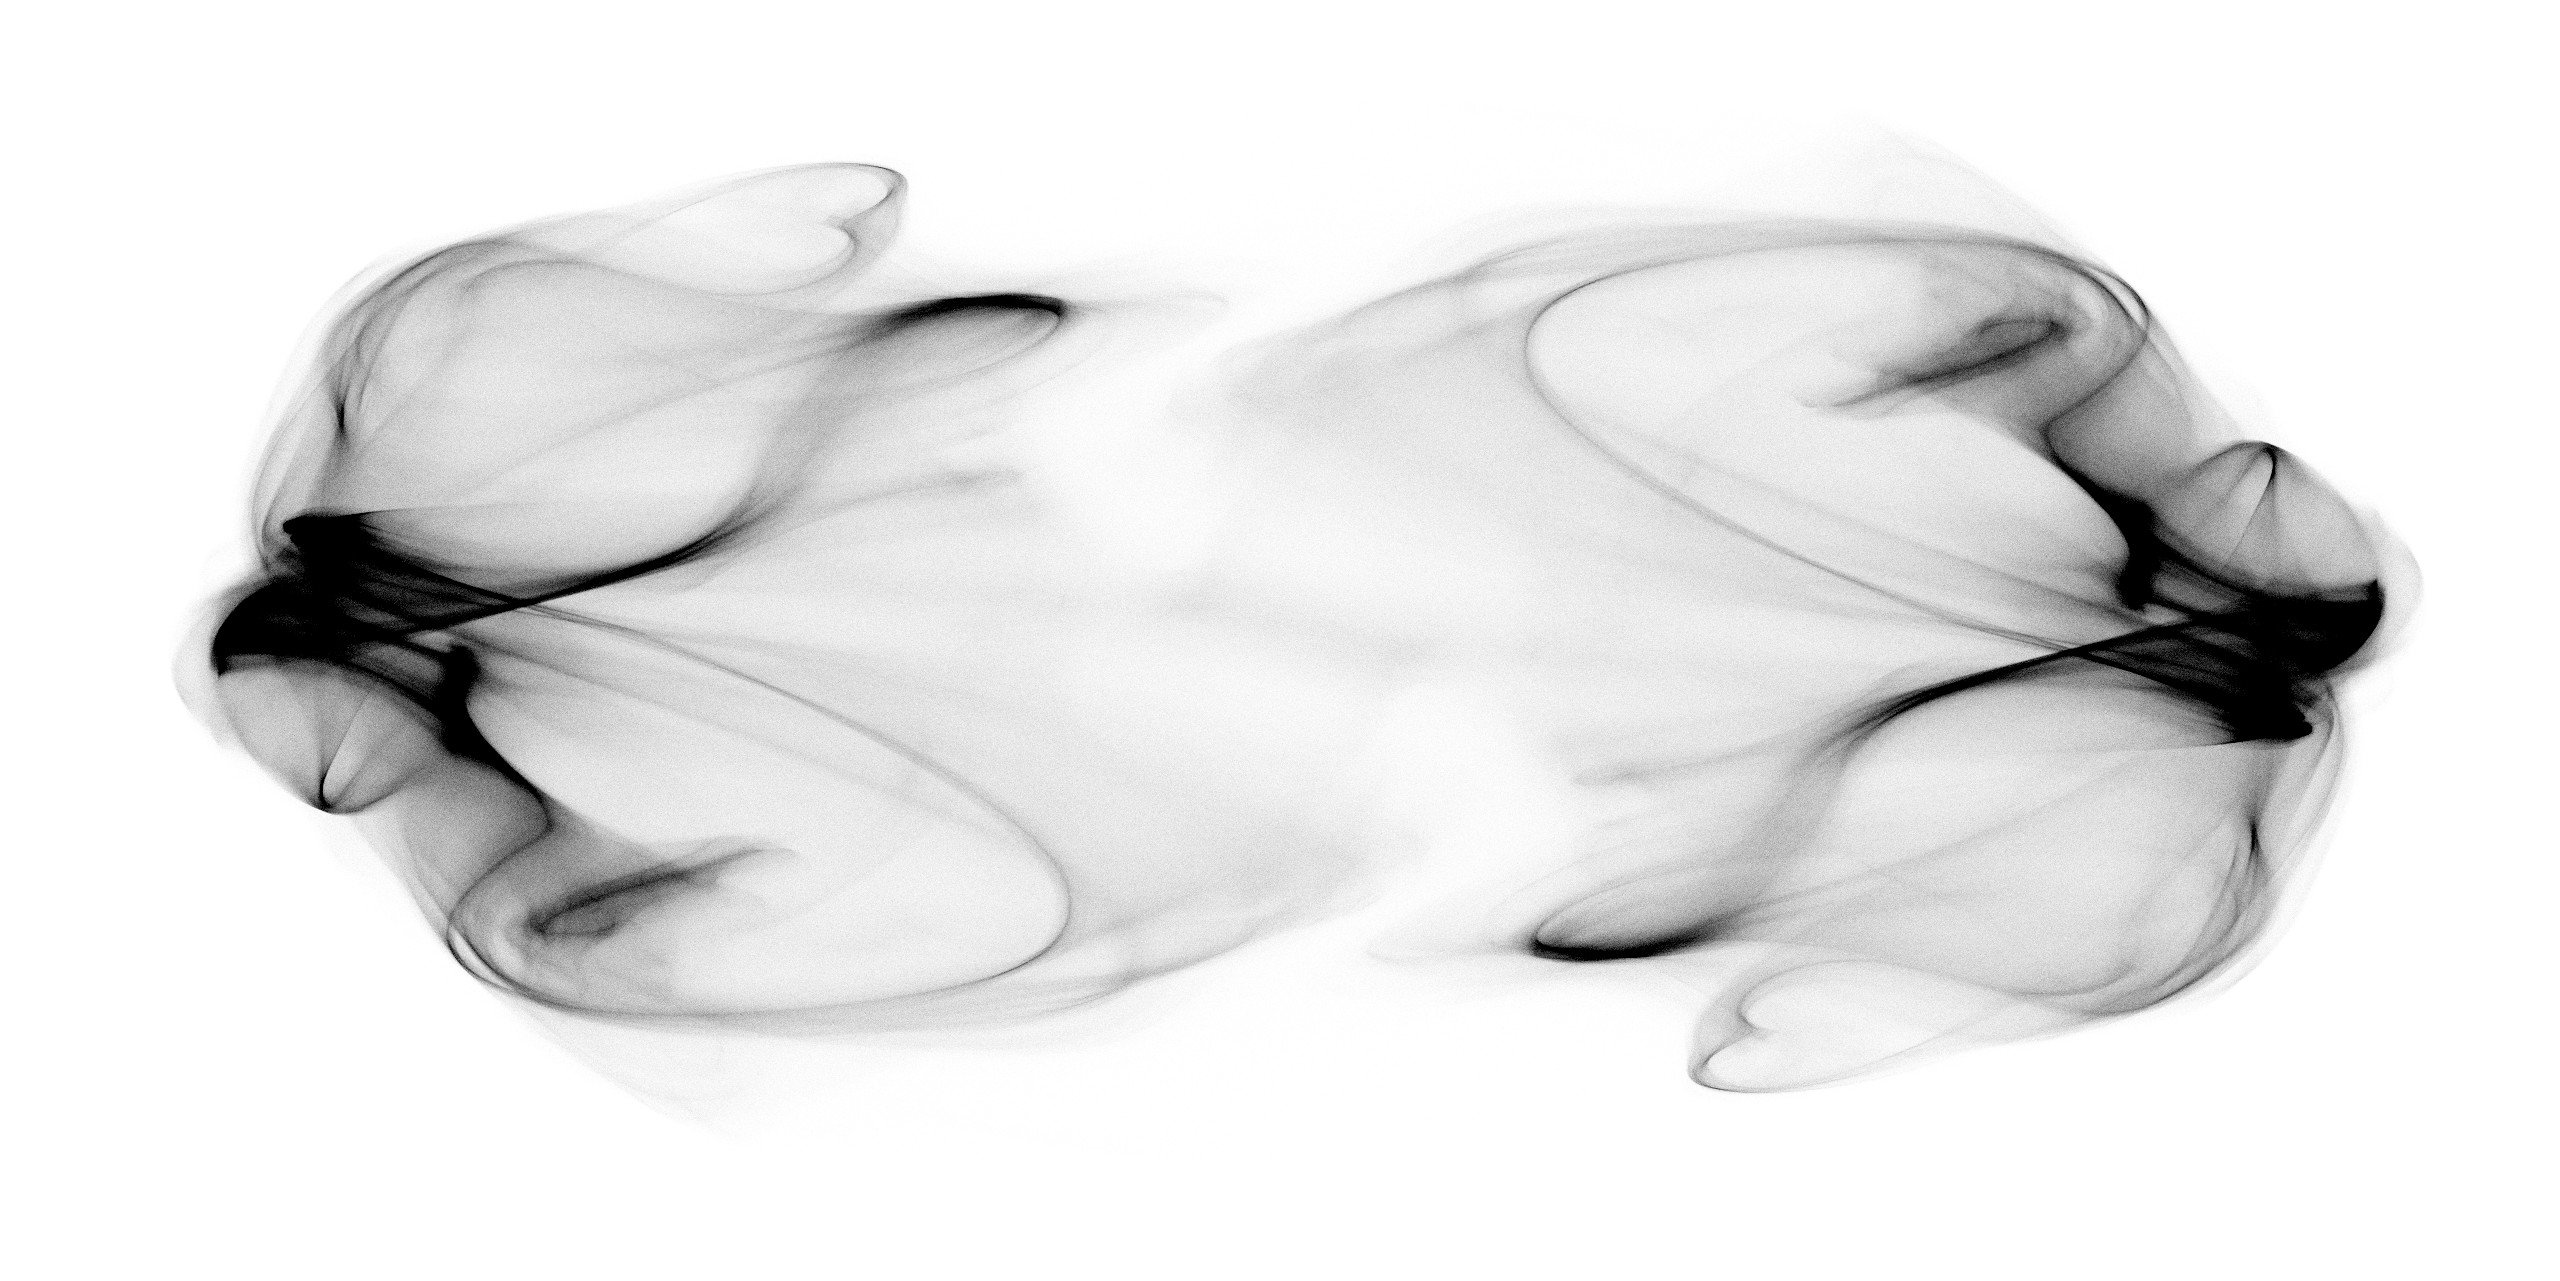 visualization of low-dimensional attractor of chaotic firing-rate network by Rainer Engelken